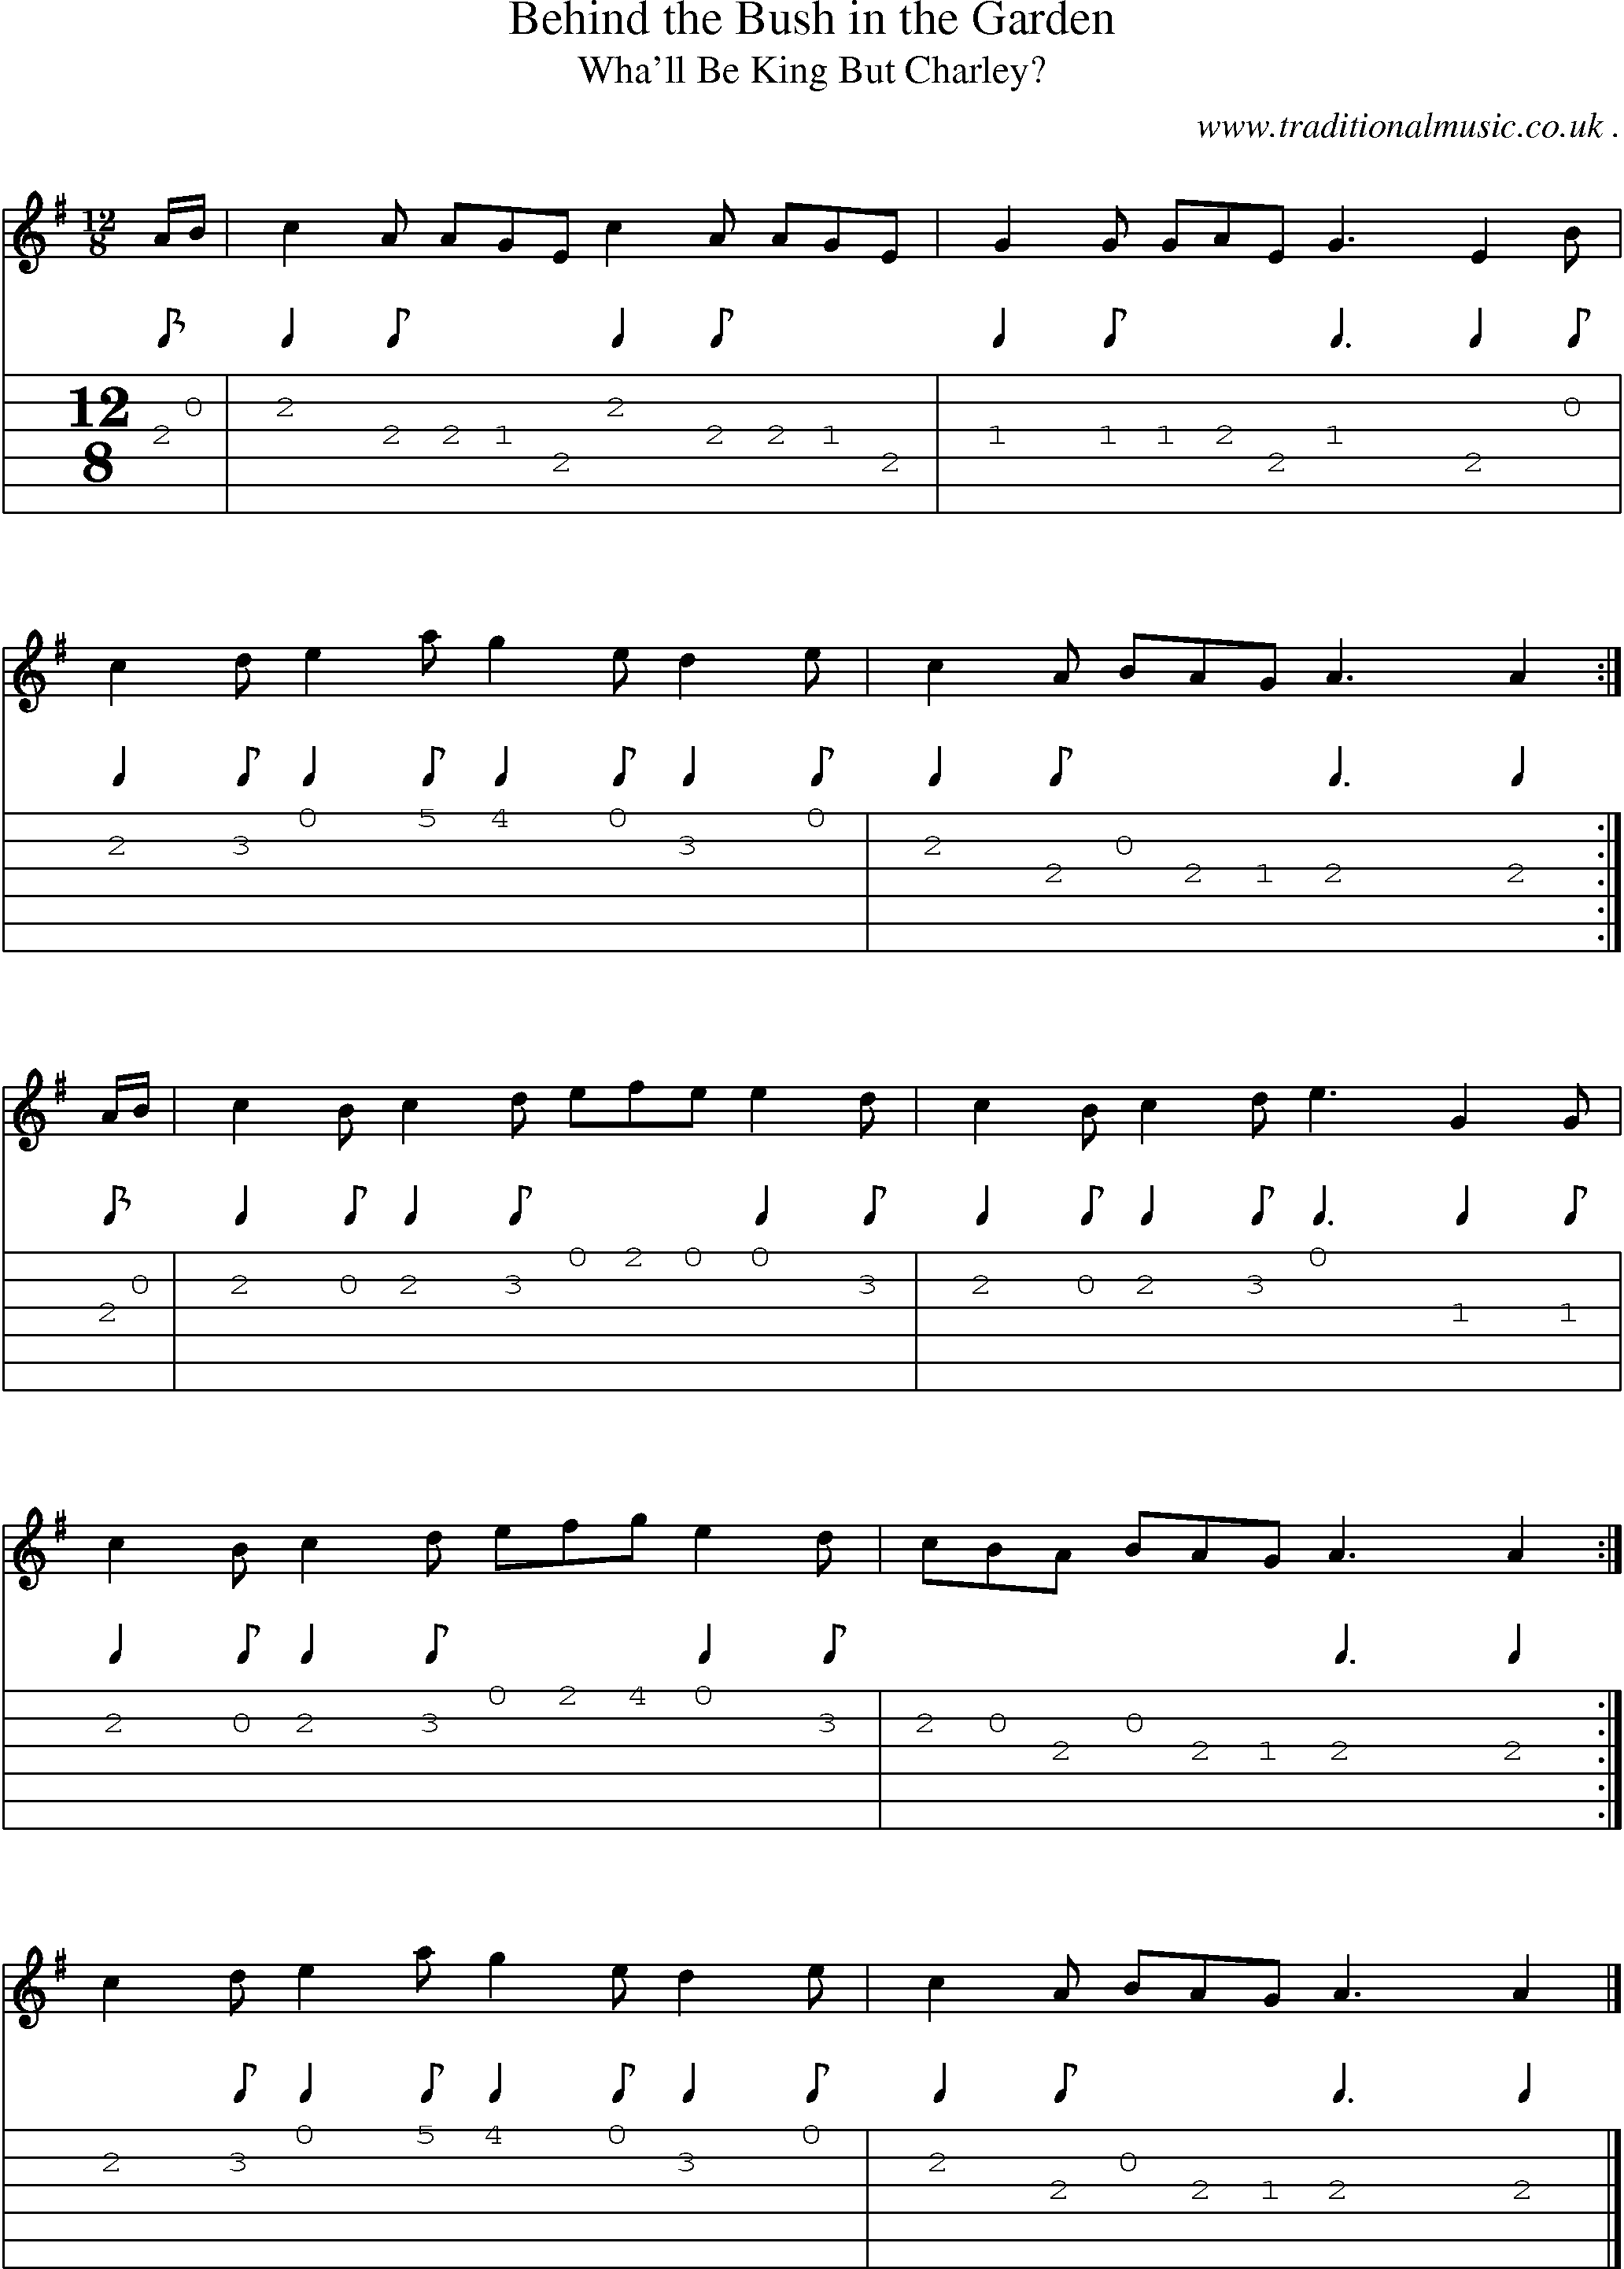 Sheet-music  score, Chords and Guitar Tabs for Behind The Bush In The Garden